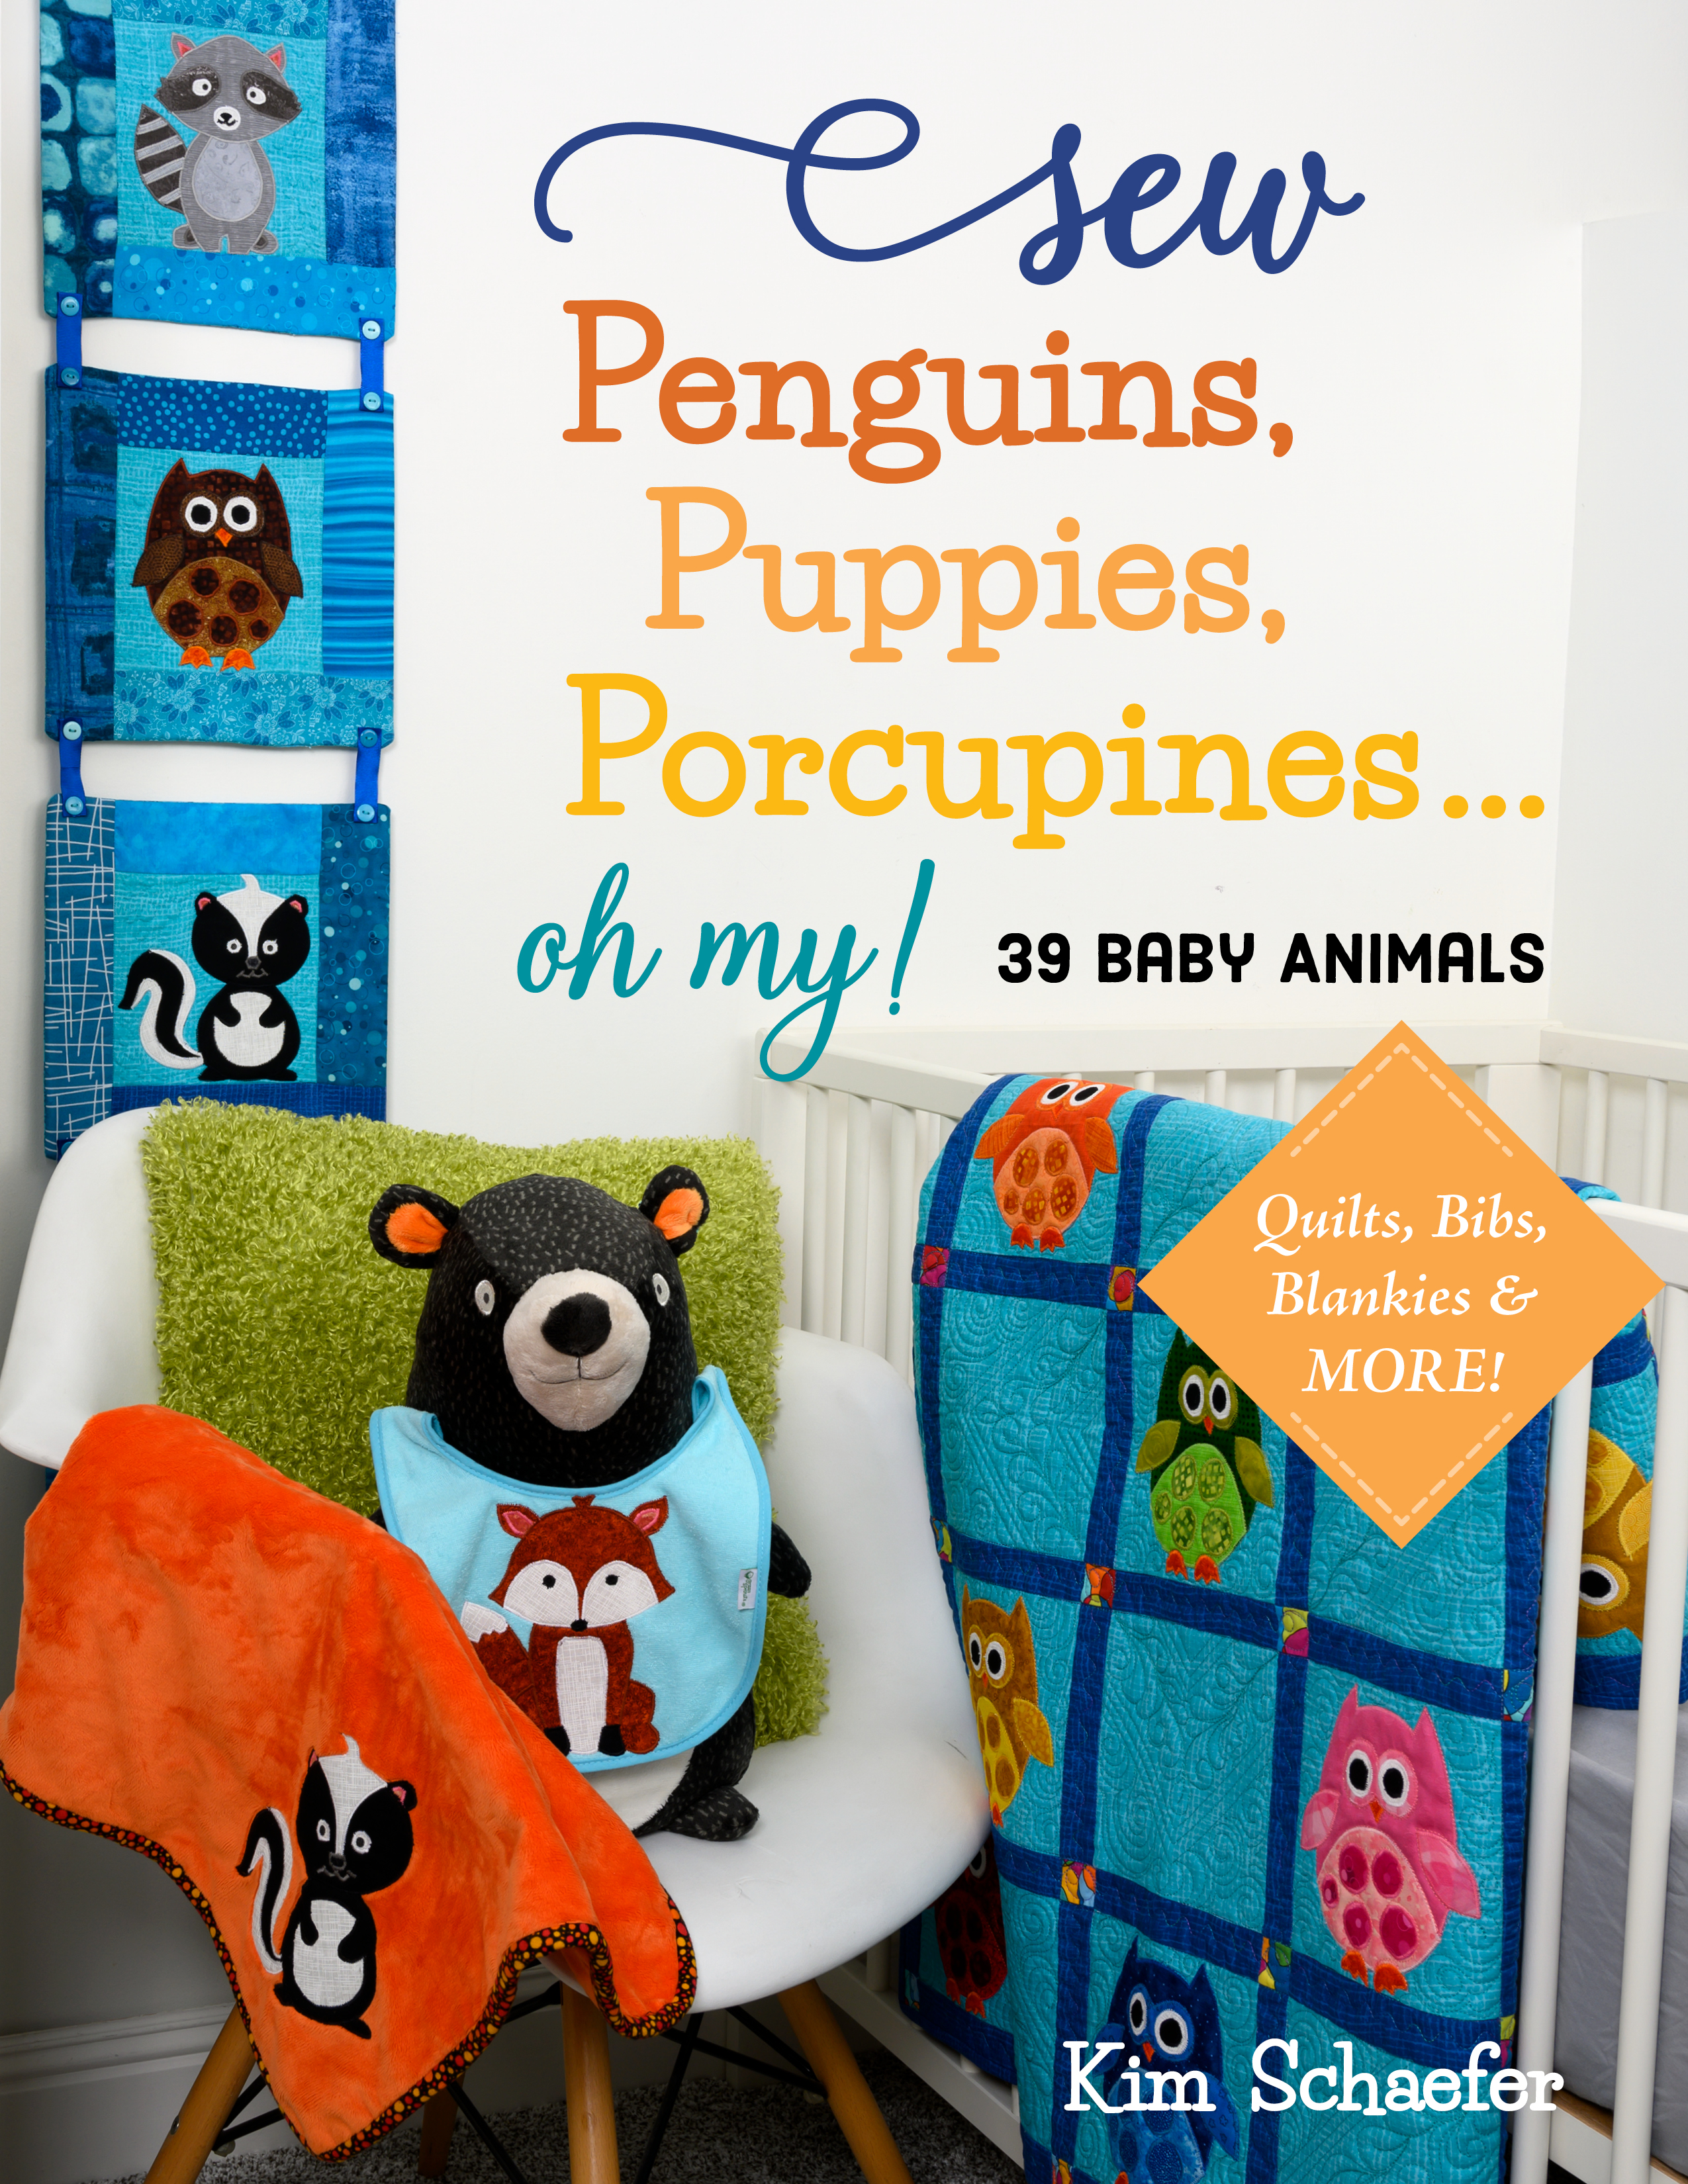 https://www.ctpub.com/sew-penguins-puppies-porcupines-oh-my/